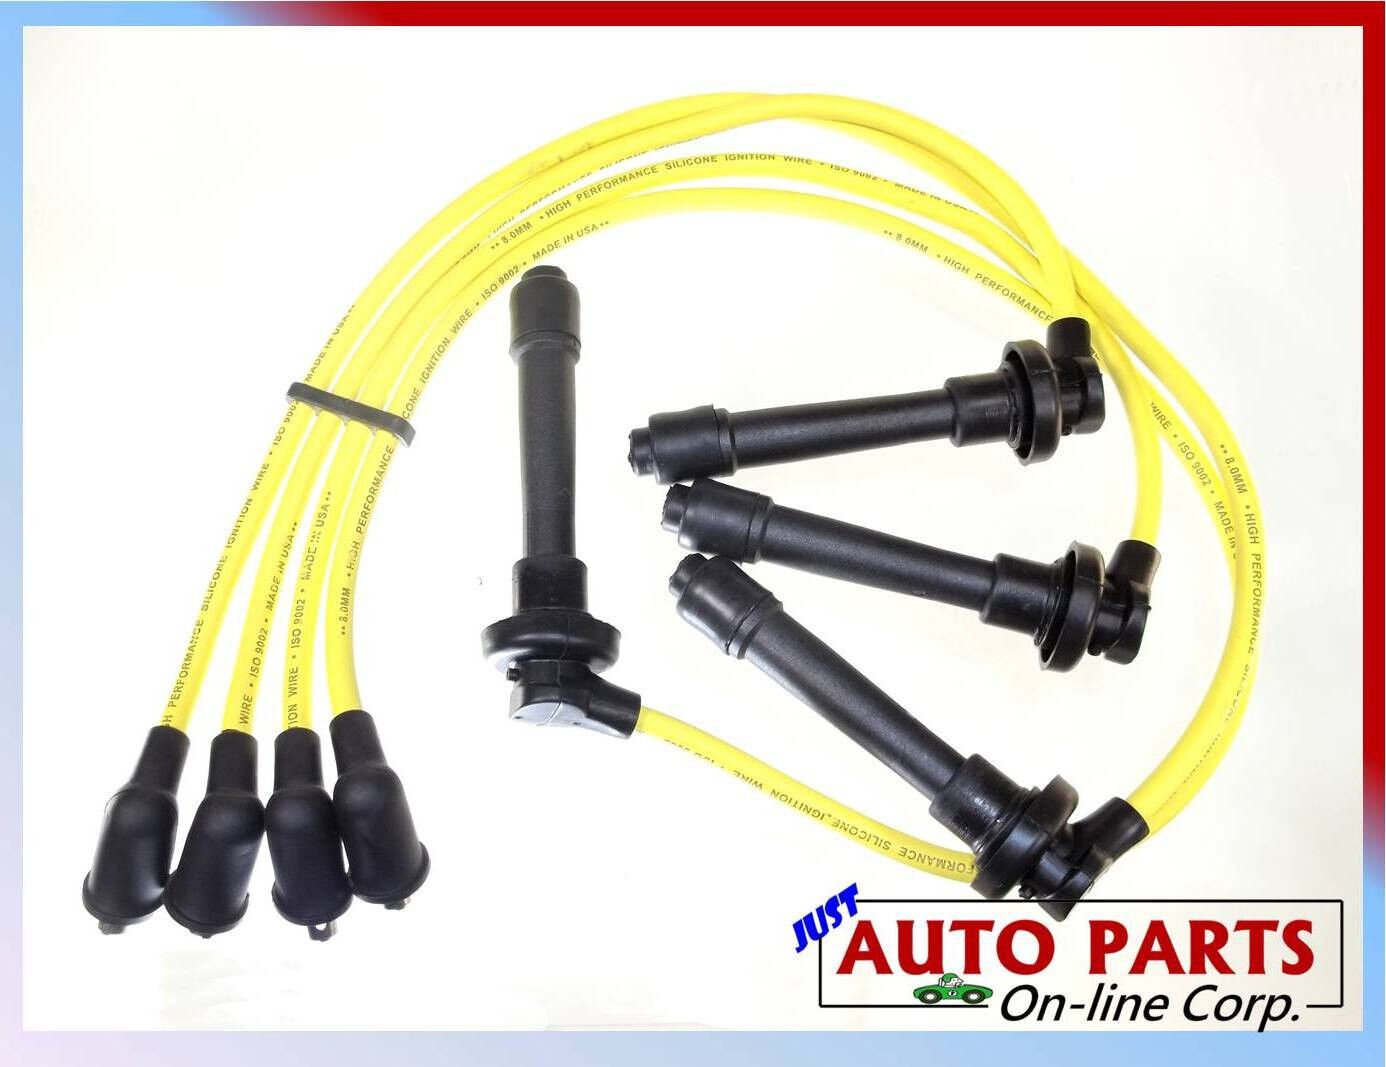 IGNITION SPARK PLUG WIRES CIVIC ACCORD ACURA CL OASIS  L4 1.5L 1.6L 2.2L 2.3L  